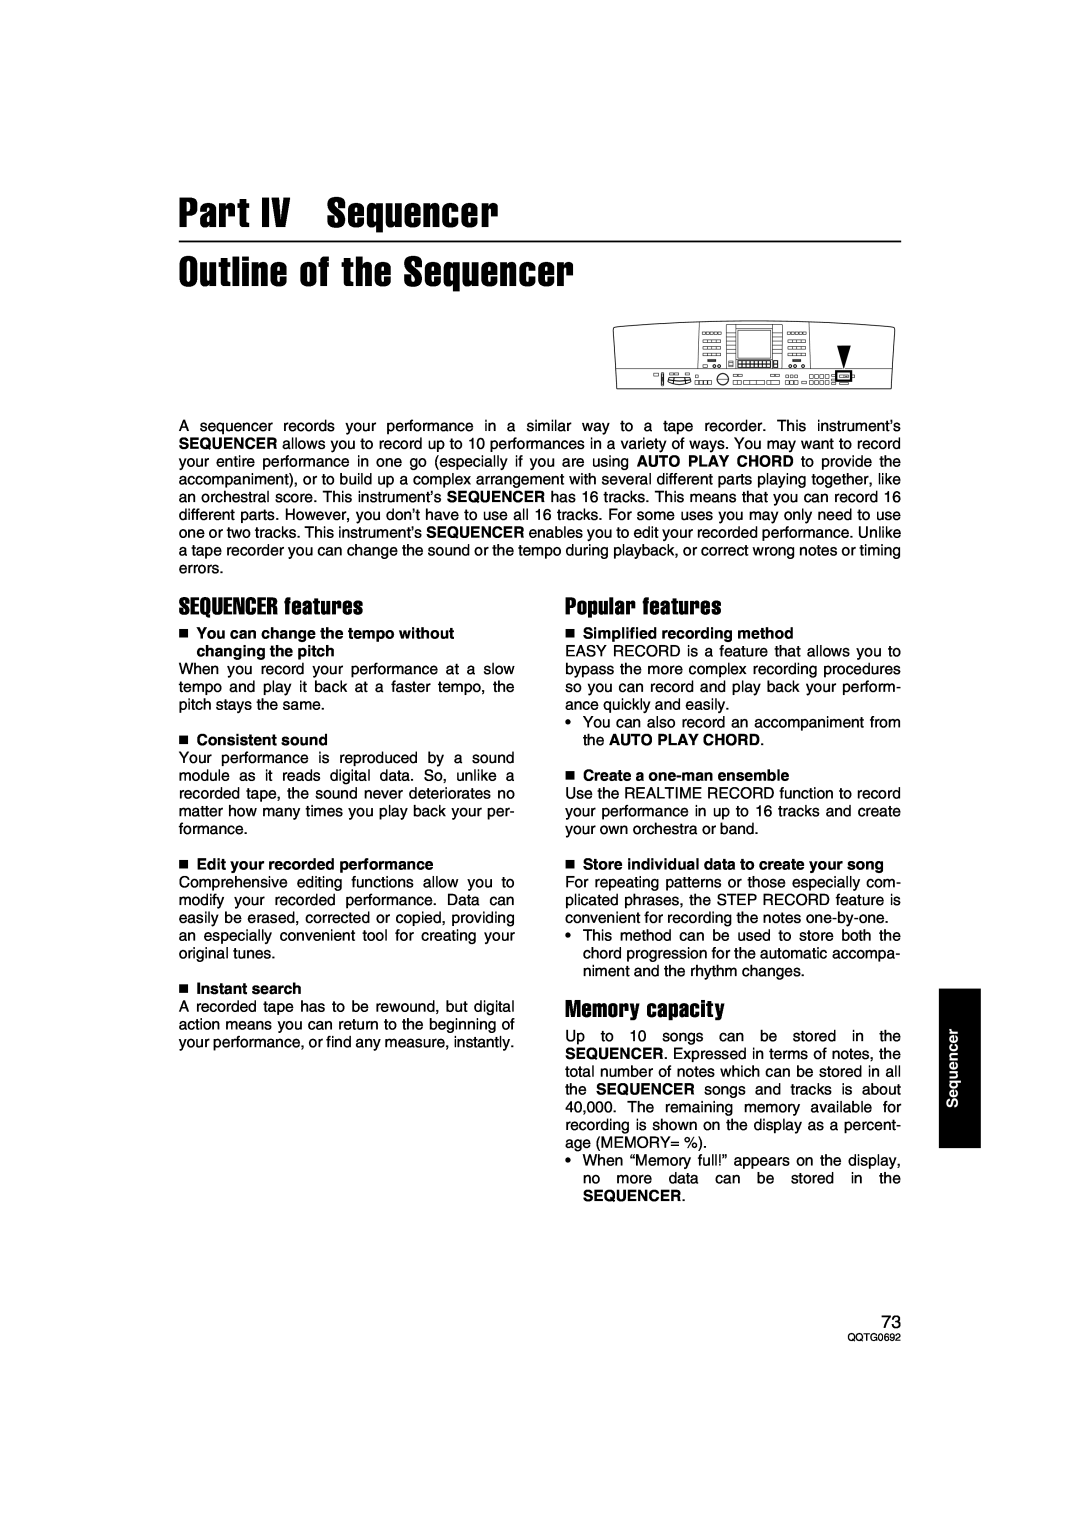 Panasonic SX-KN2400 Part IV Sequencer Outline of the Sequencer, SEQUENCER features, Popular features, Memory capacity 